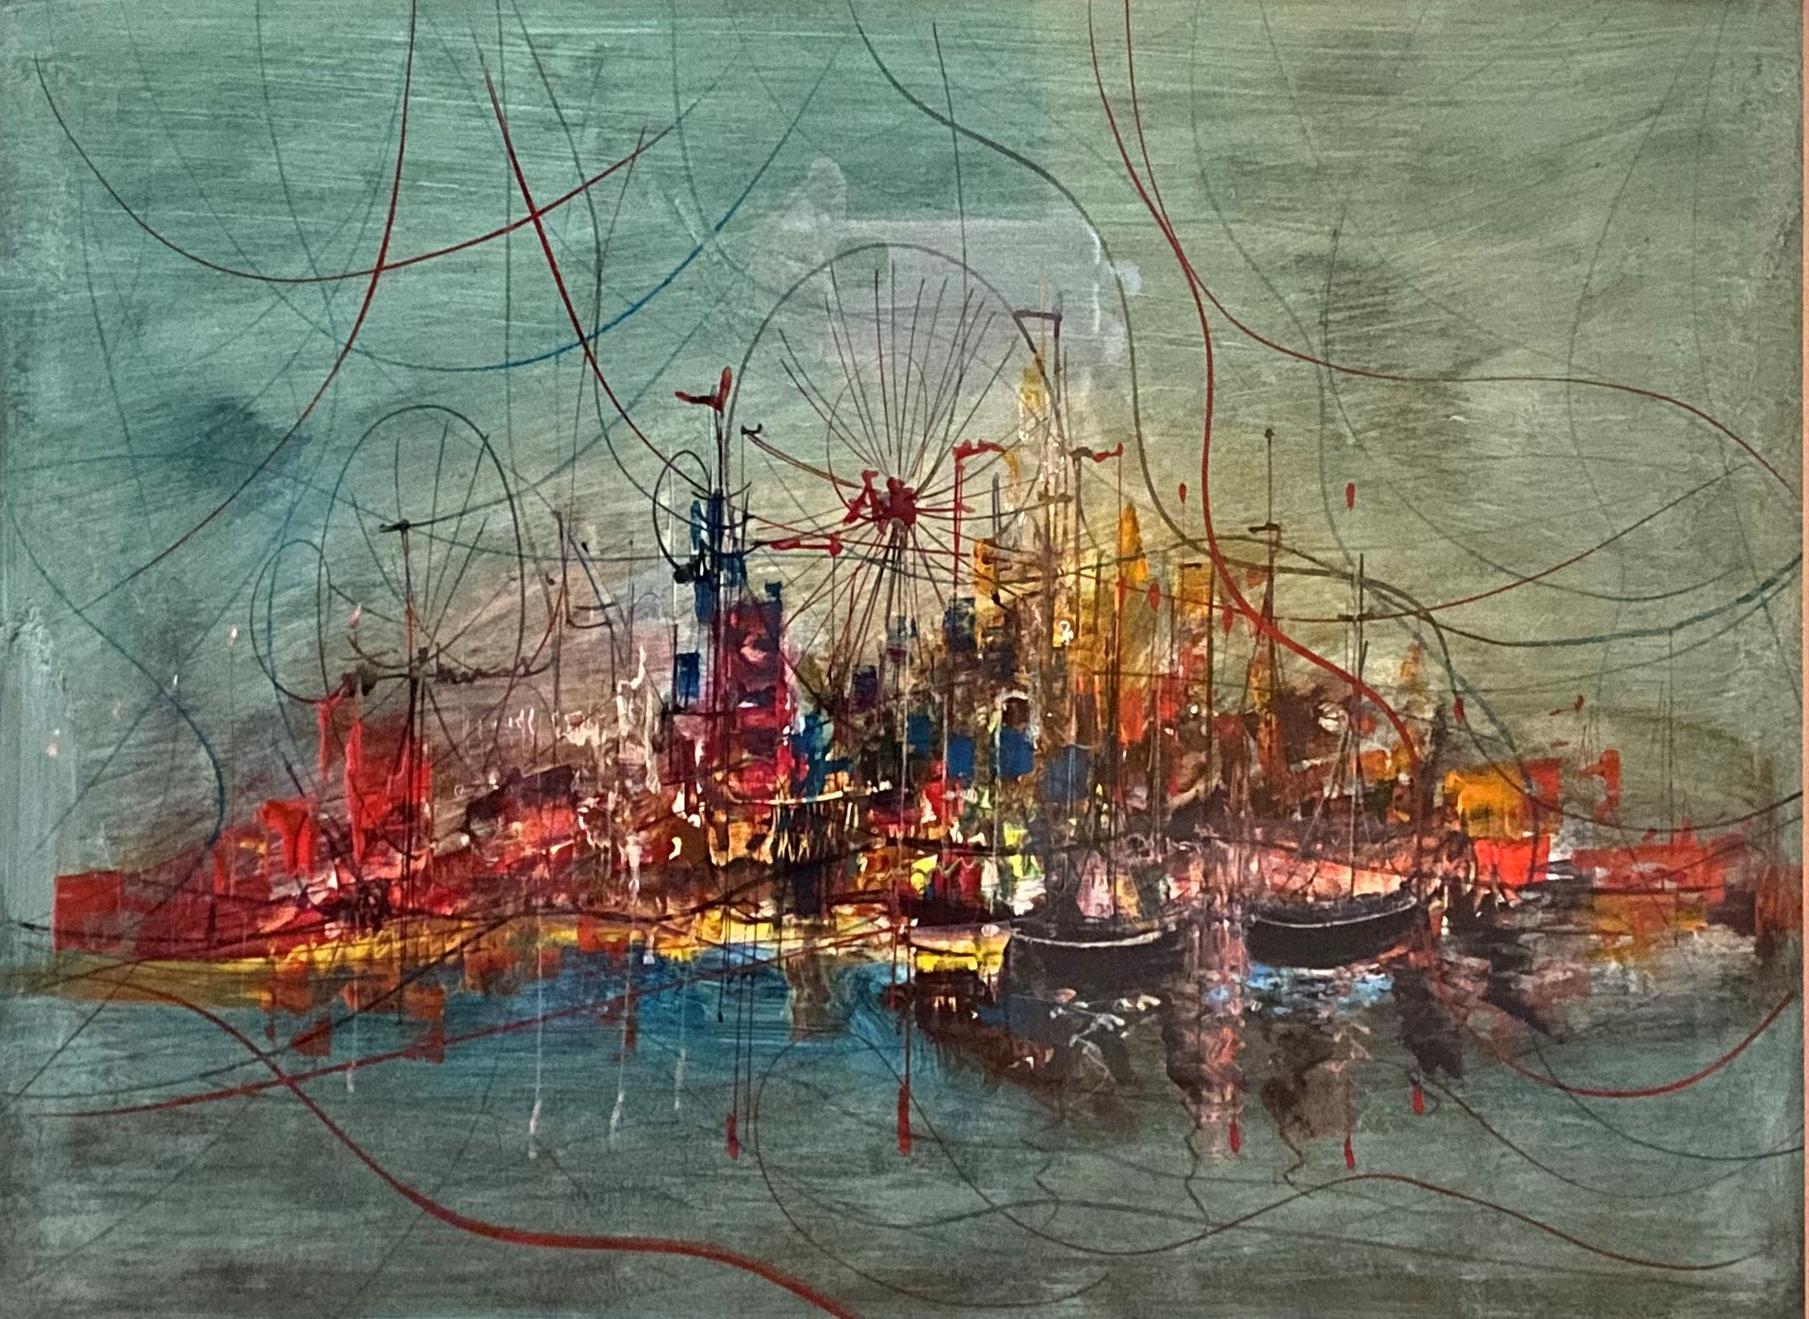 Abstract Modernist Urban Skyline Landscape, New York City Harbor Lights - Mixed Media Art by Unknown